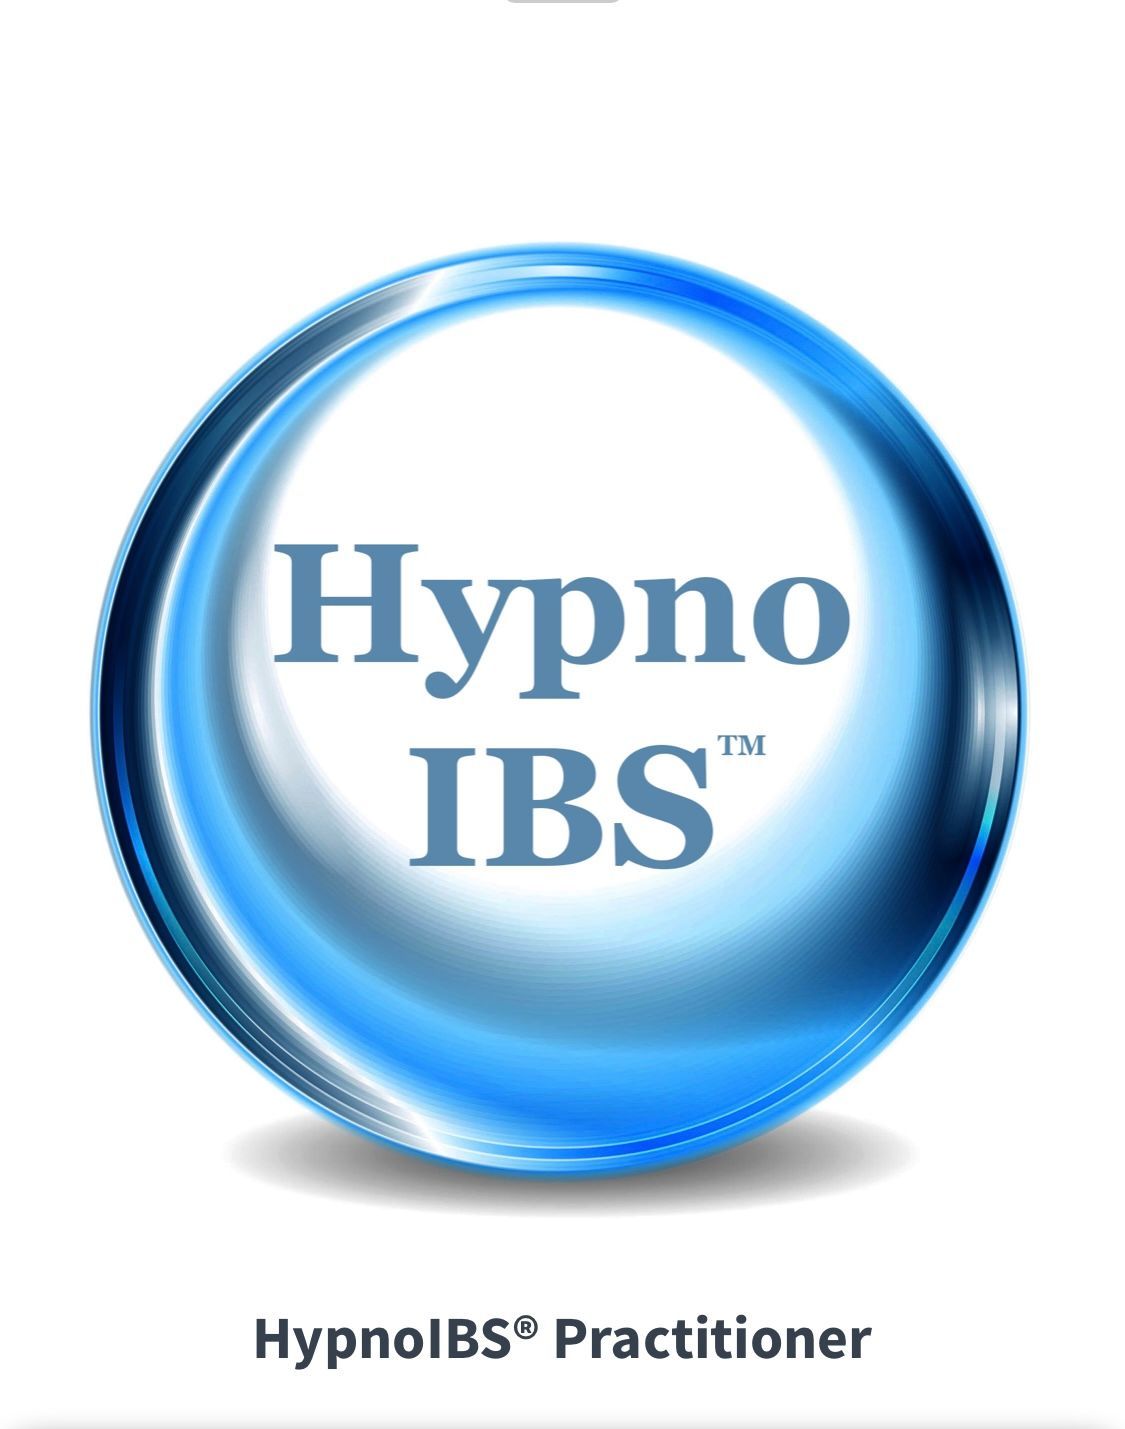 Gallery Photo of Hypnotherapy is recommended by the National Institute of Clinical Excellence as a treatment for IBS . I provide an accredited 3 session course for IBS